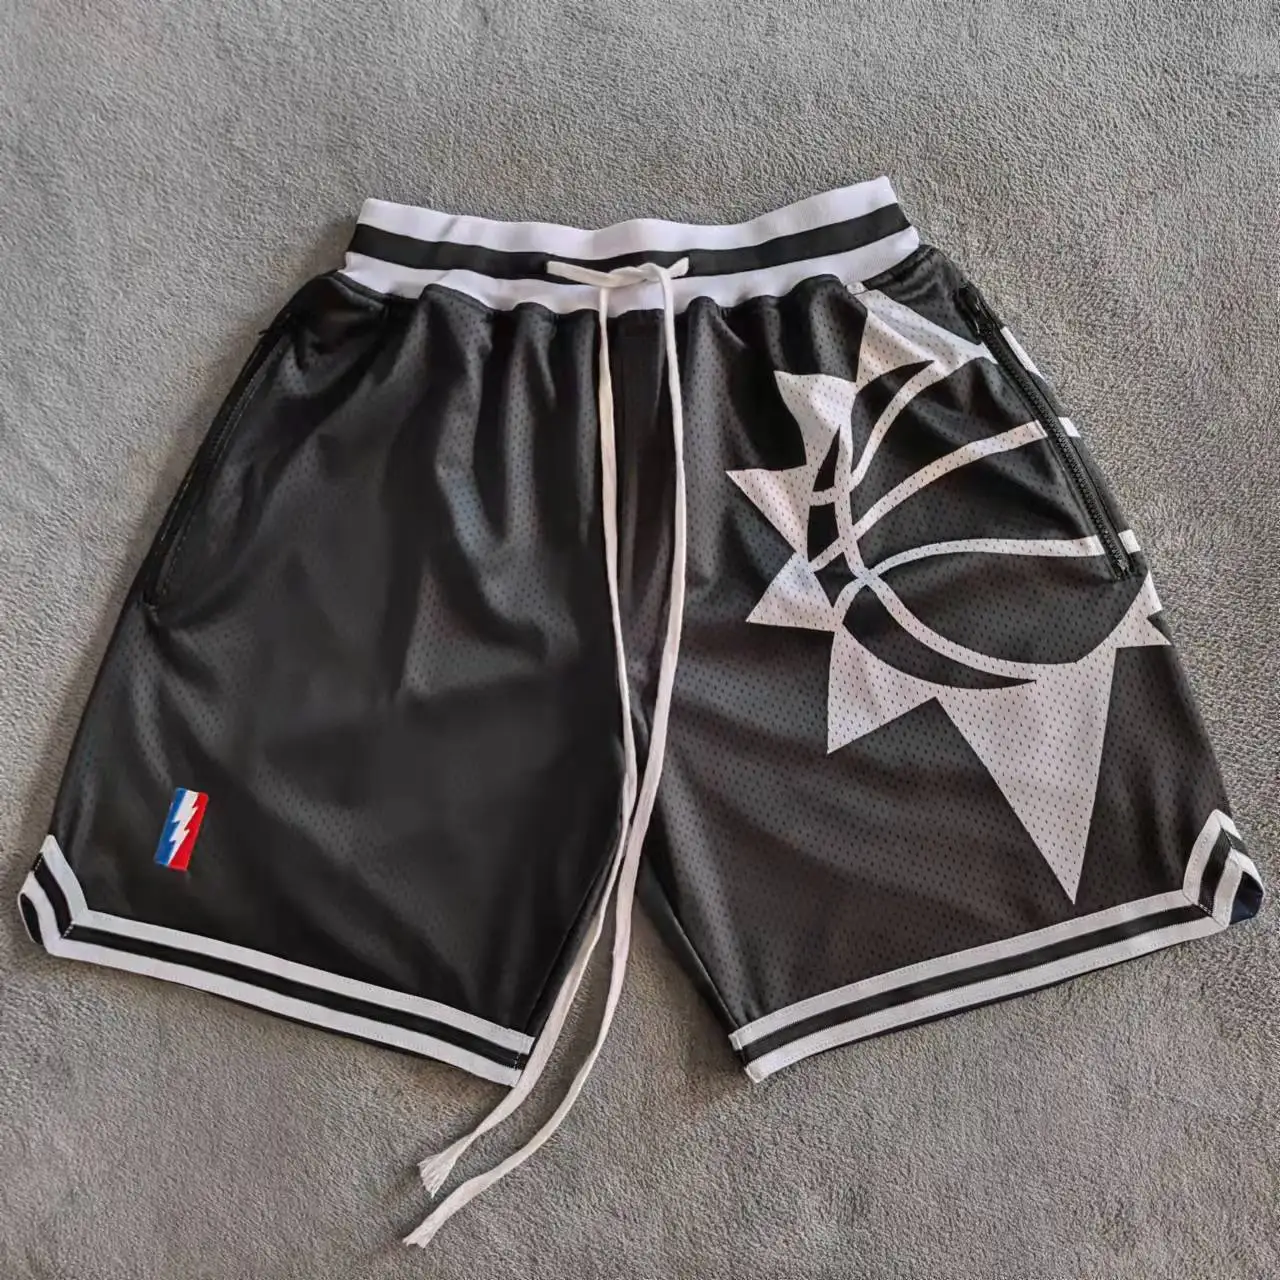 TRILLEST Black&White Sun Printed Basketball Shorts with Zipper Pockets Devin Booker Street Style Sports Pants